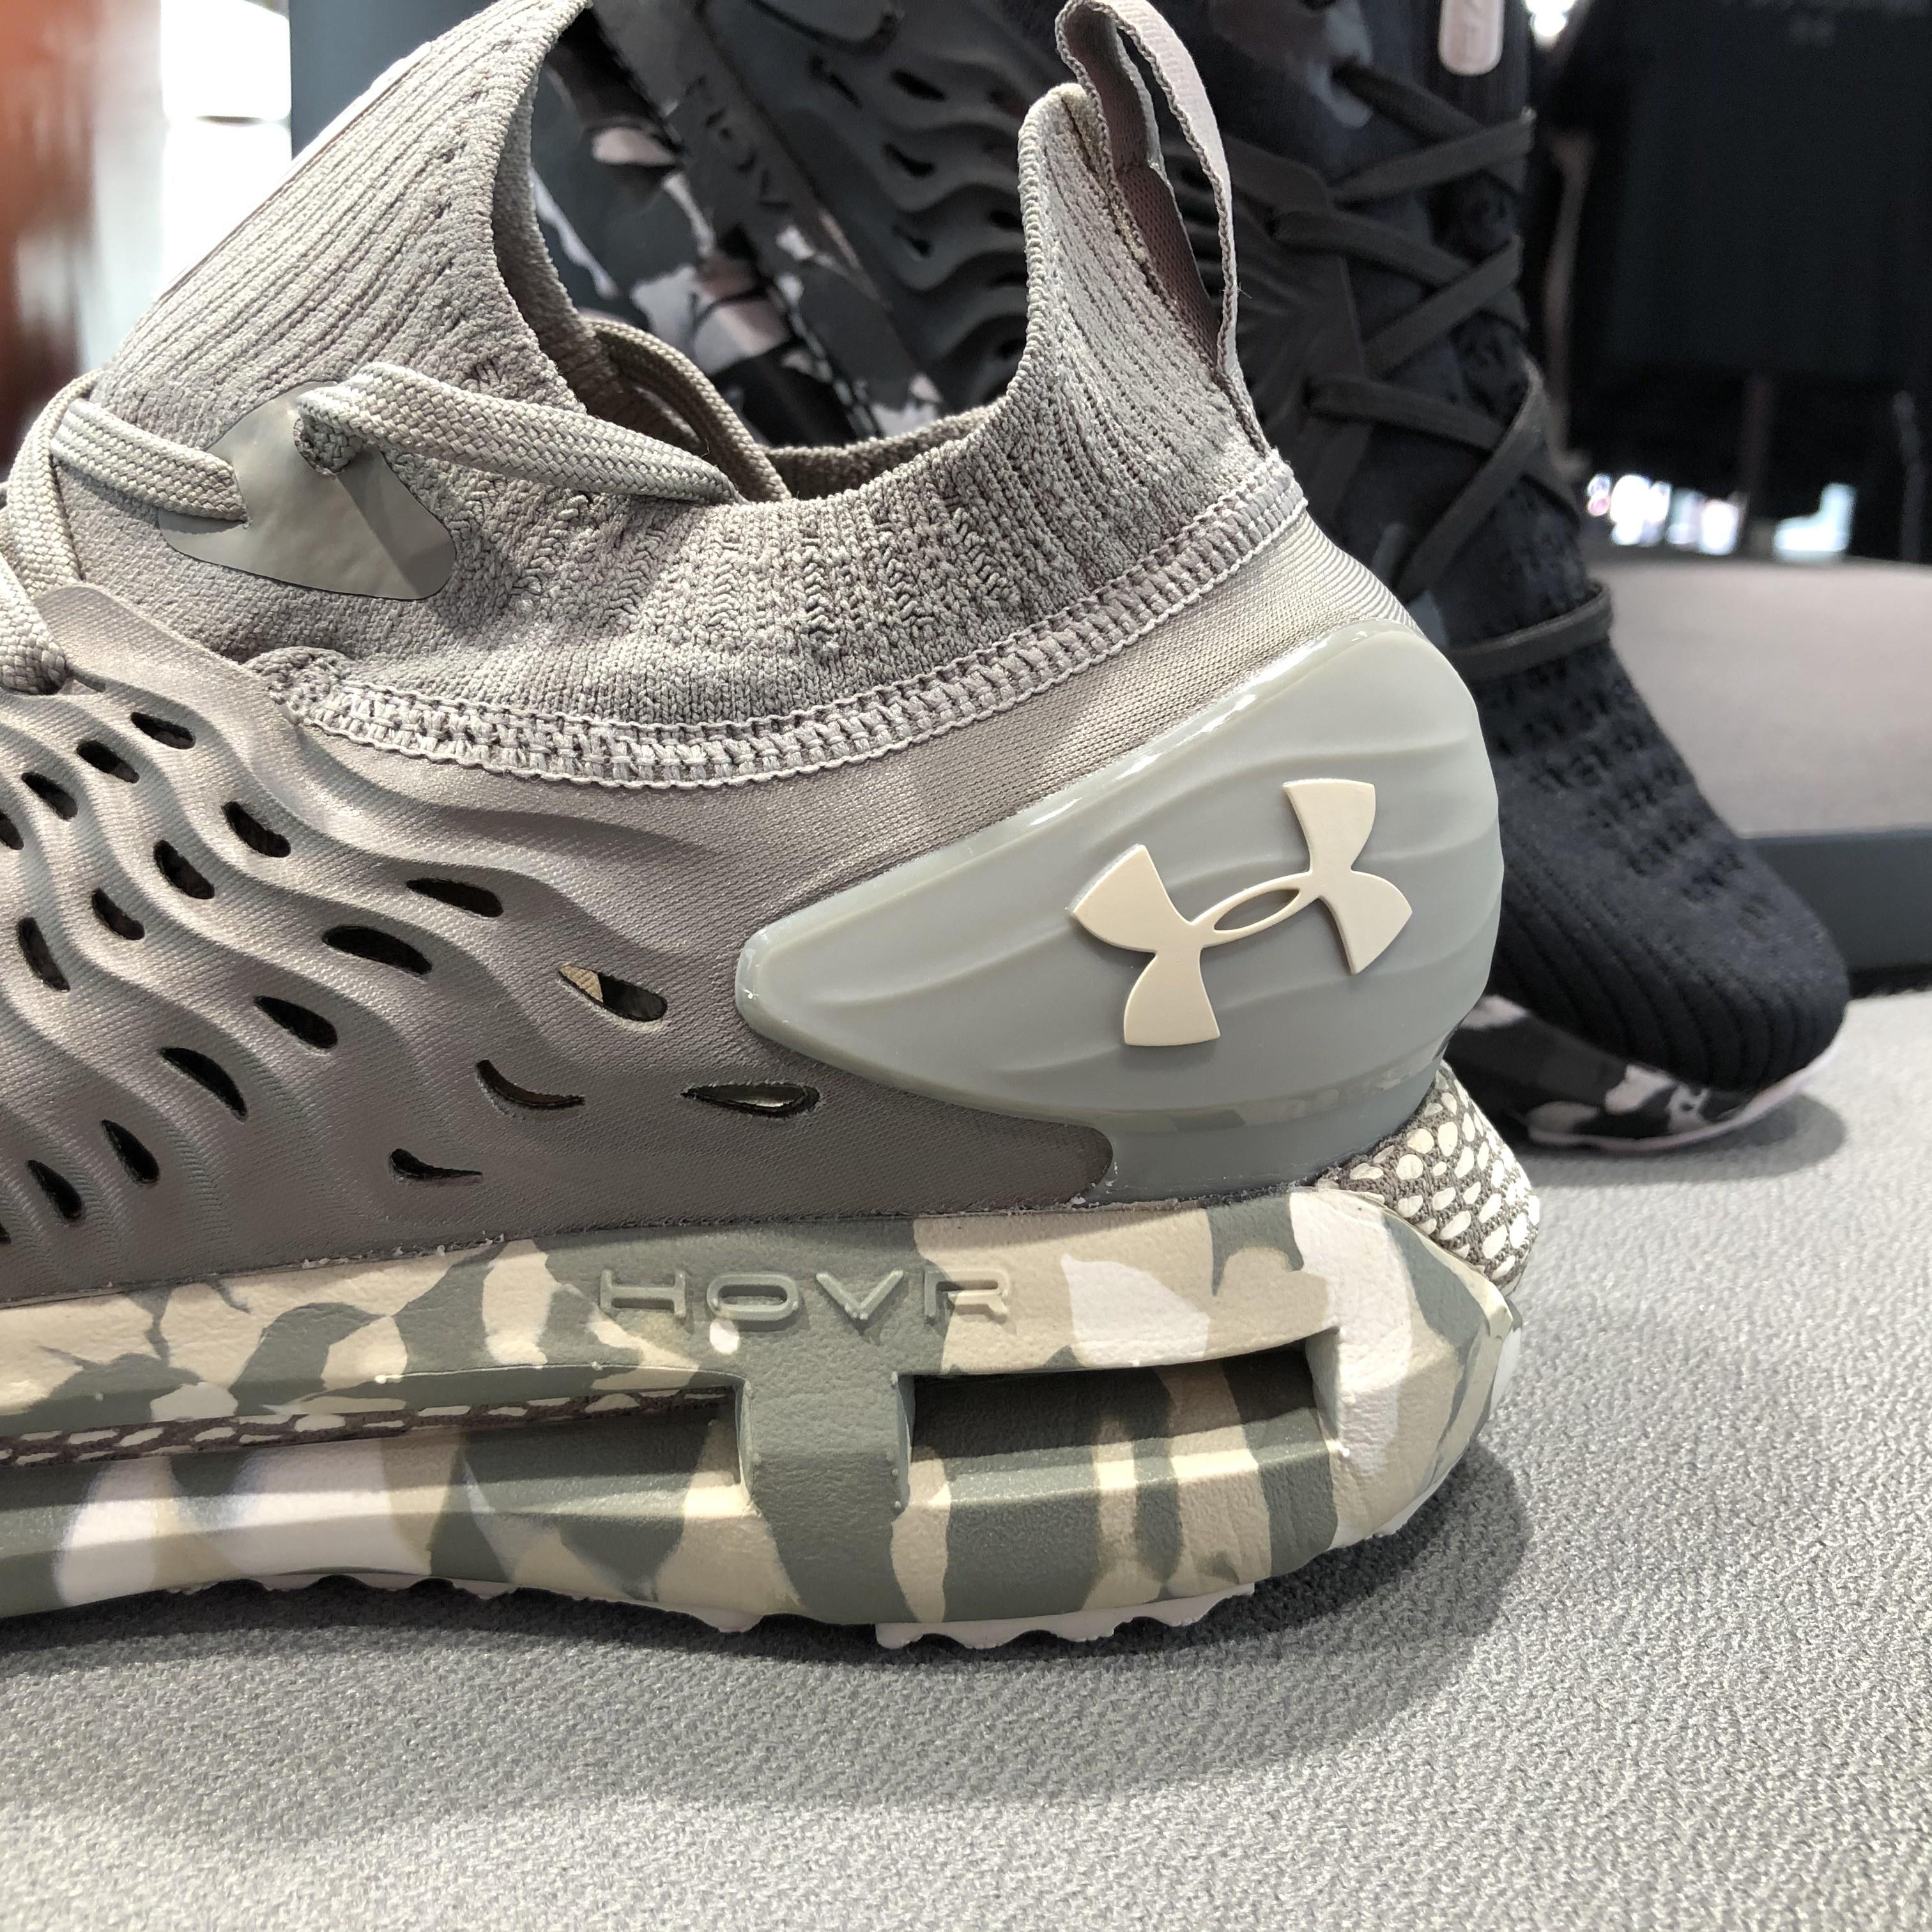 UAホバーファントムRN NEWカラー | UNDER ARMOUR CLUBHOUSE 渋谷 ...